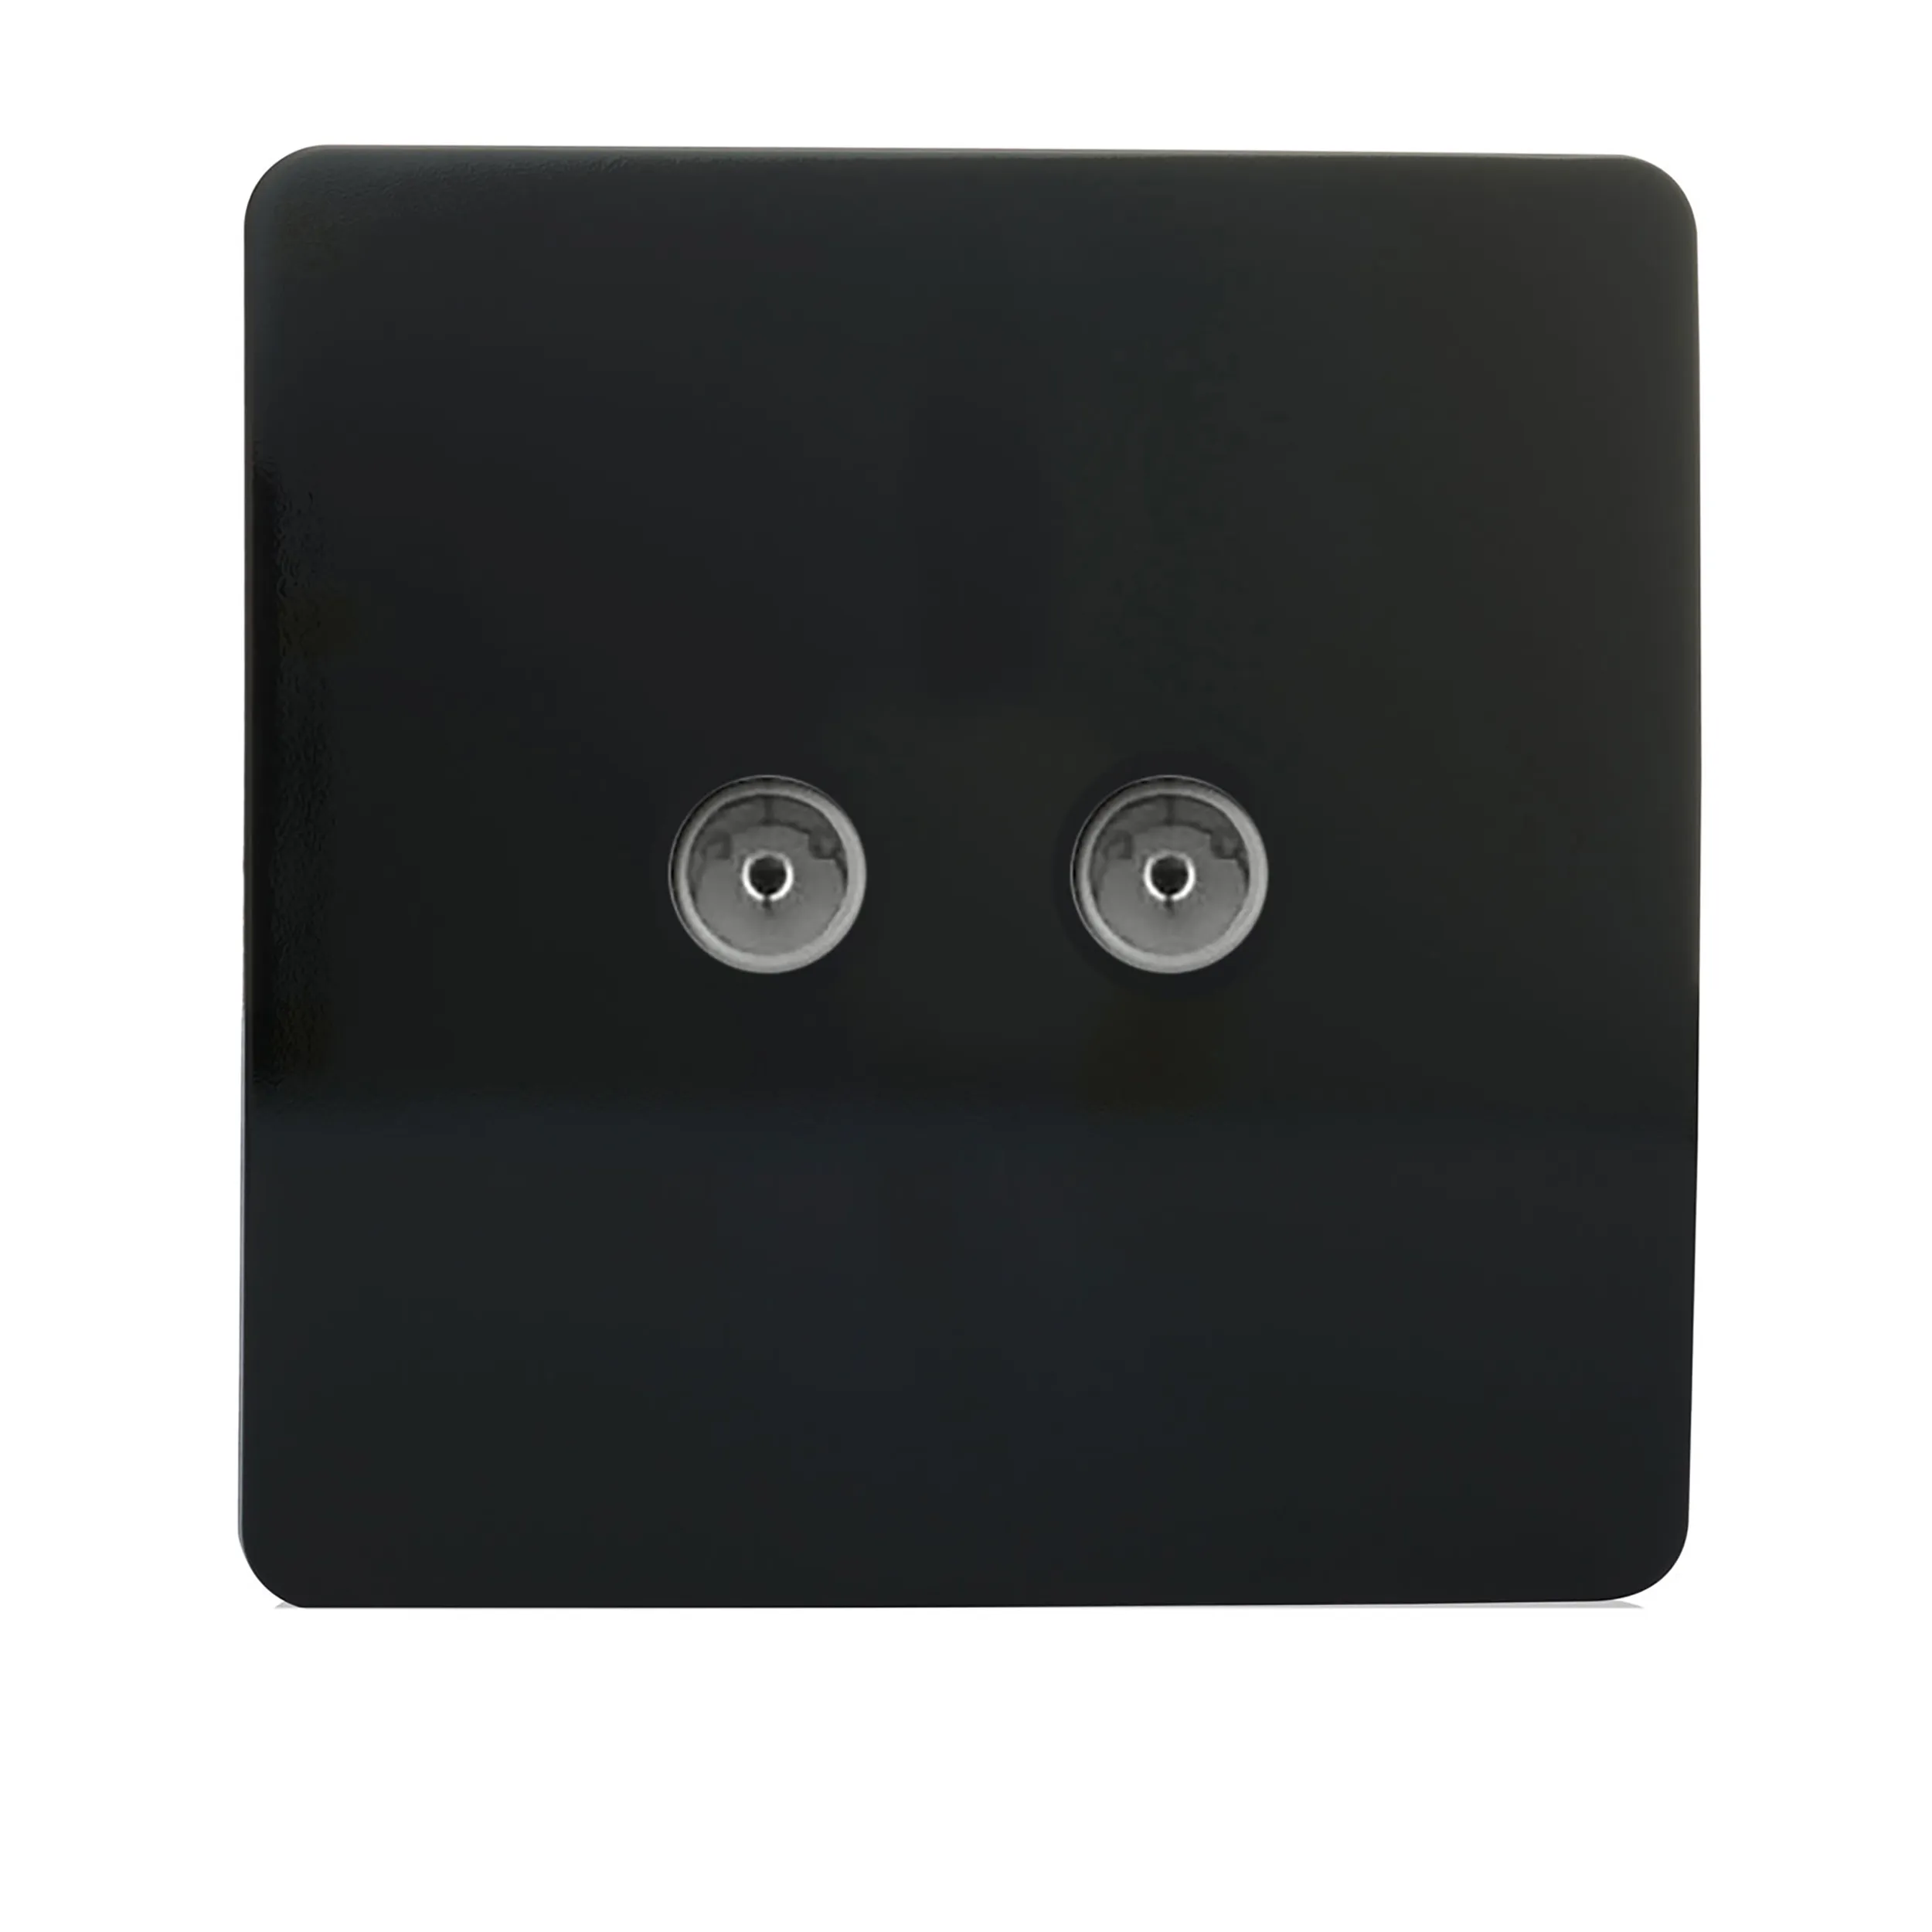 Twin TV Co-Axial Outlet Gloss Black